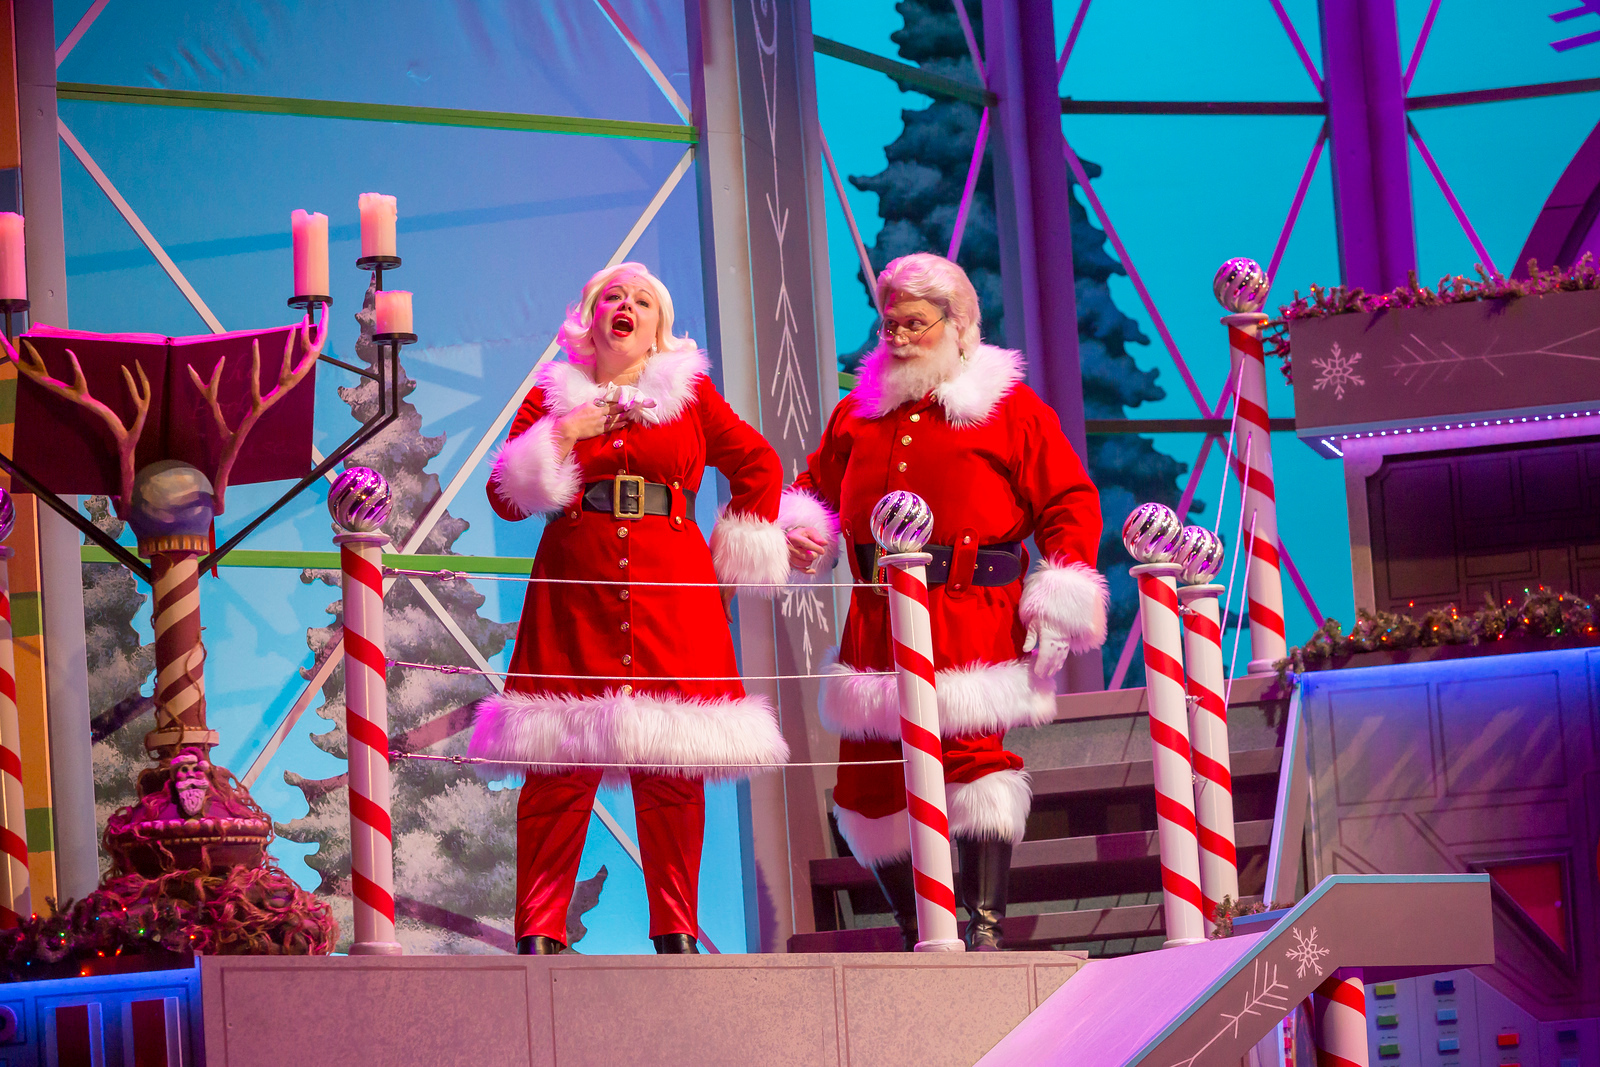 Mr. And Mrs. Claus on stage